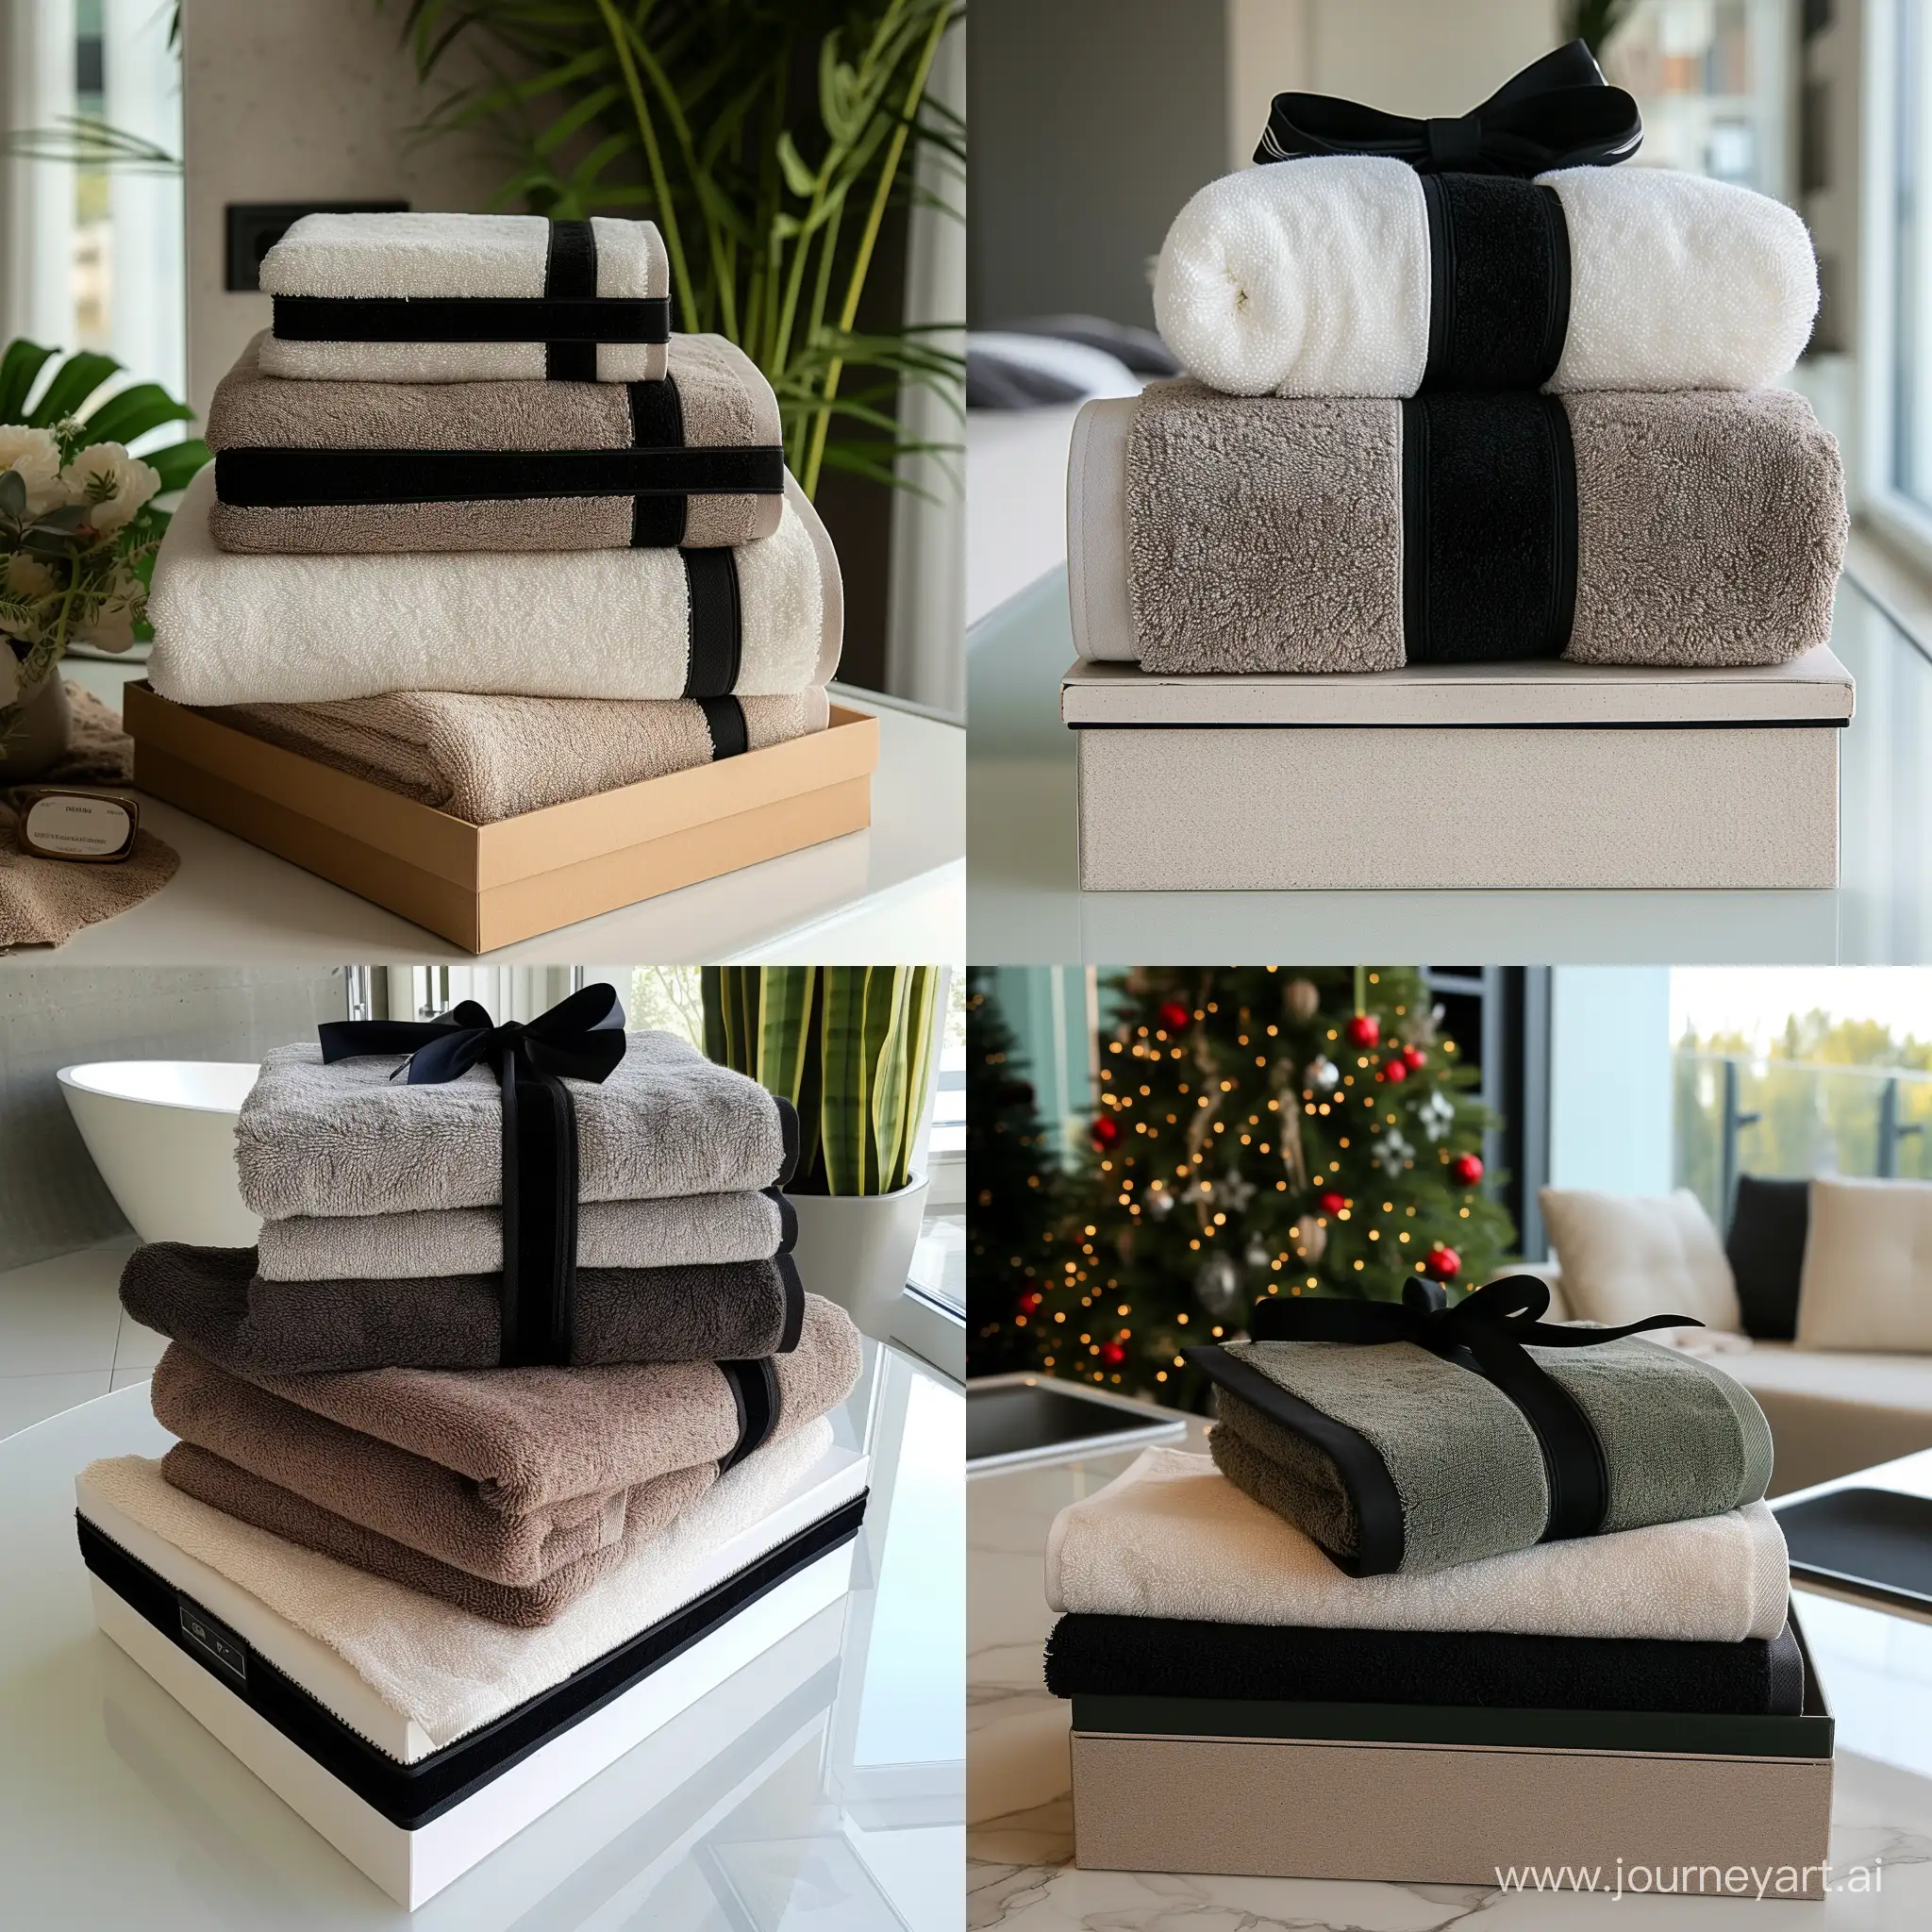 Luxurious-TwoTone-Bath-Towels-in-Stylish-Apartment-Gift-Box